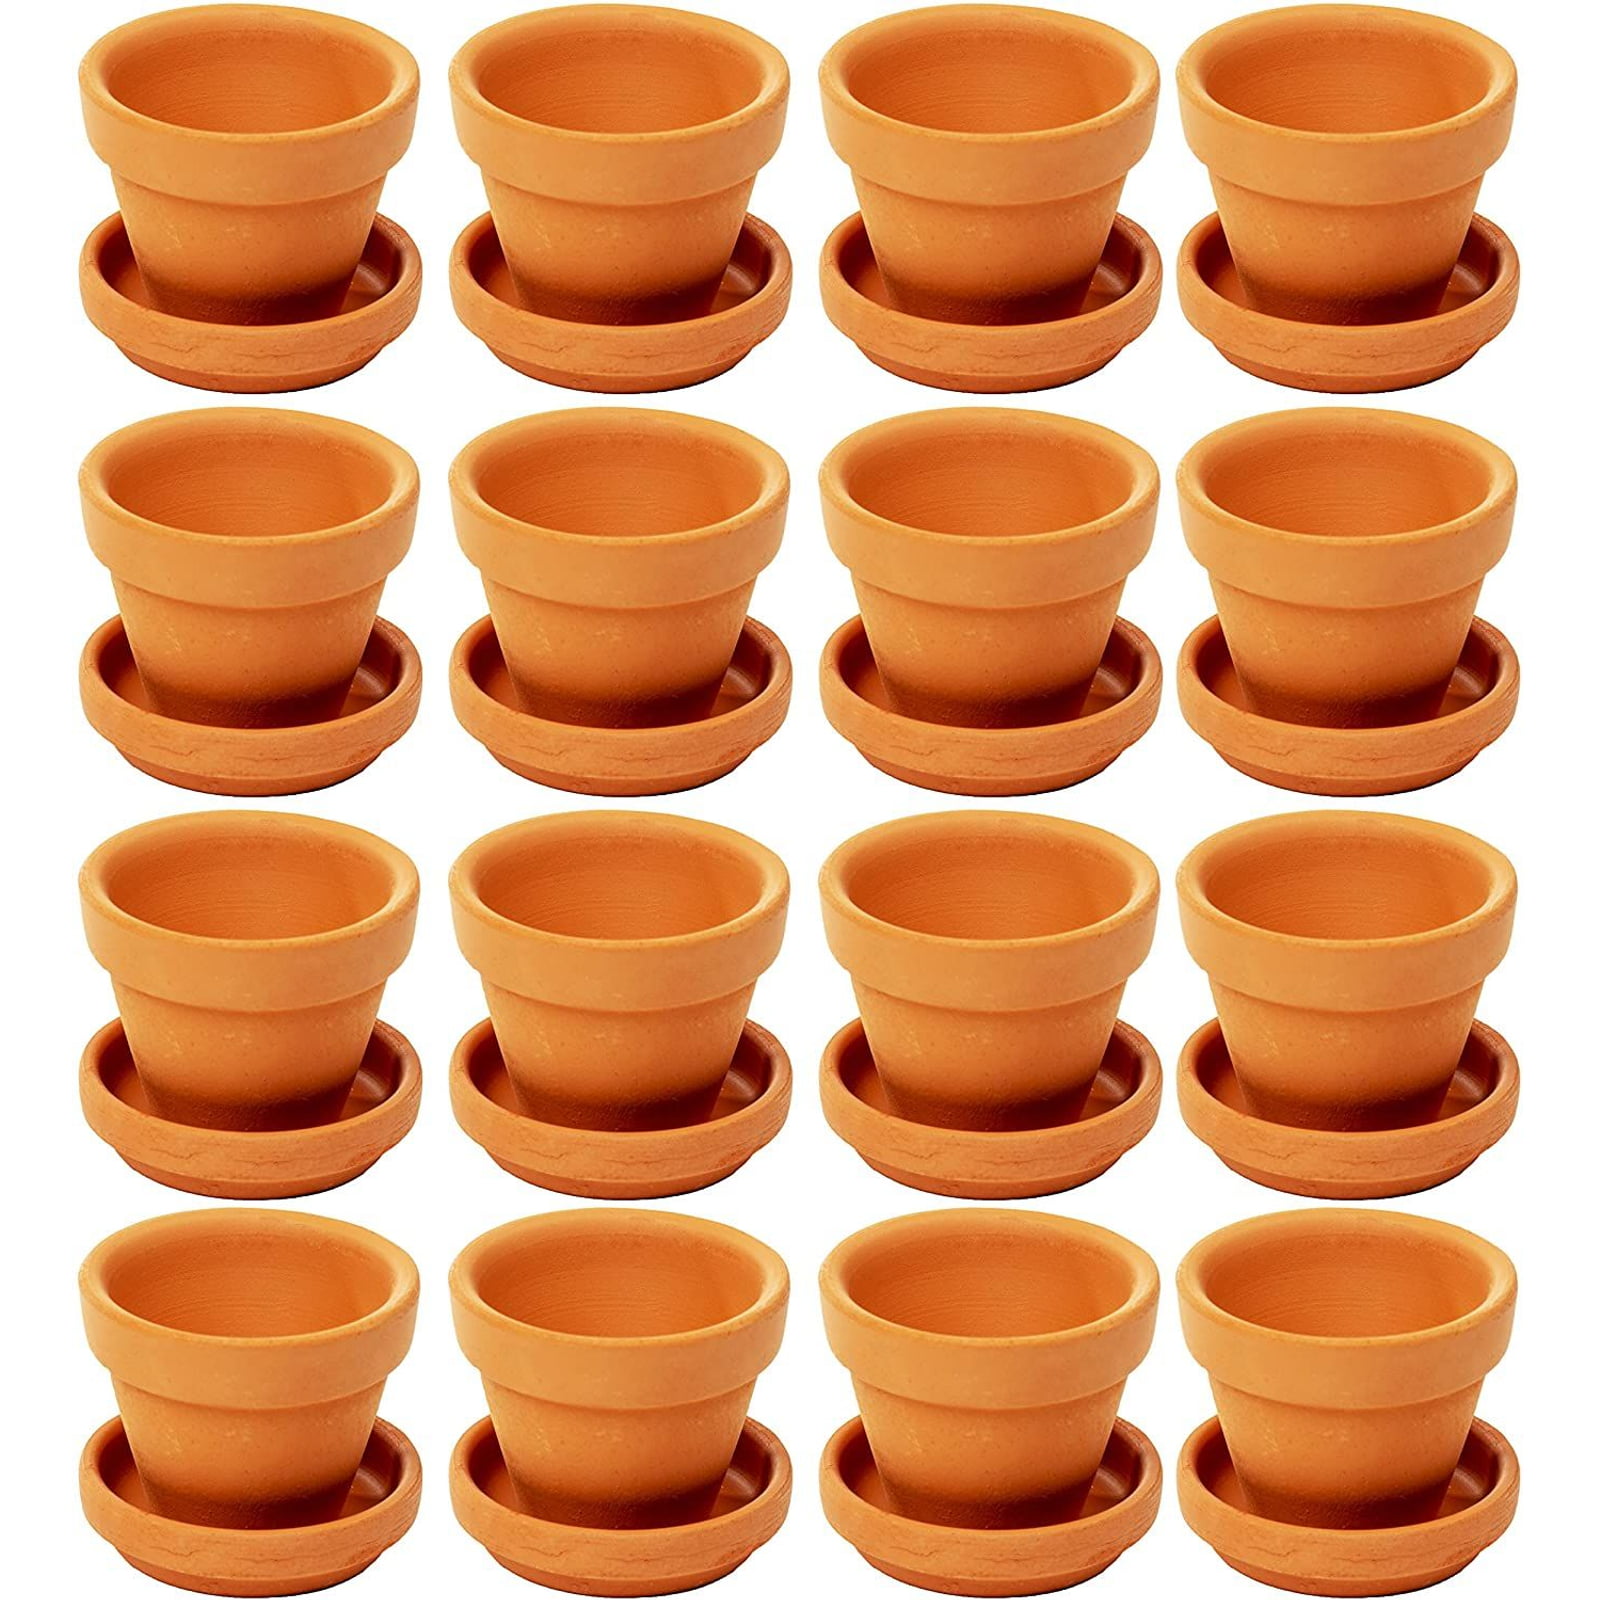 30-Count Mini 2-Inch Terra Cotta Flower Pots Ceramic Pottery Clay Planters for 